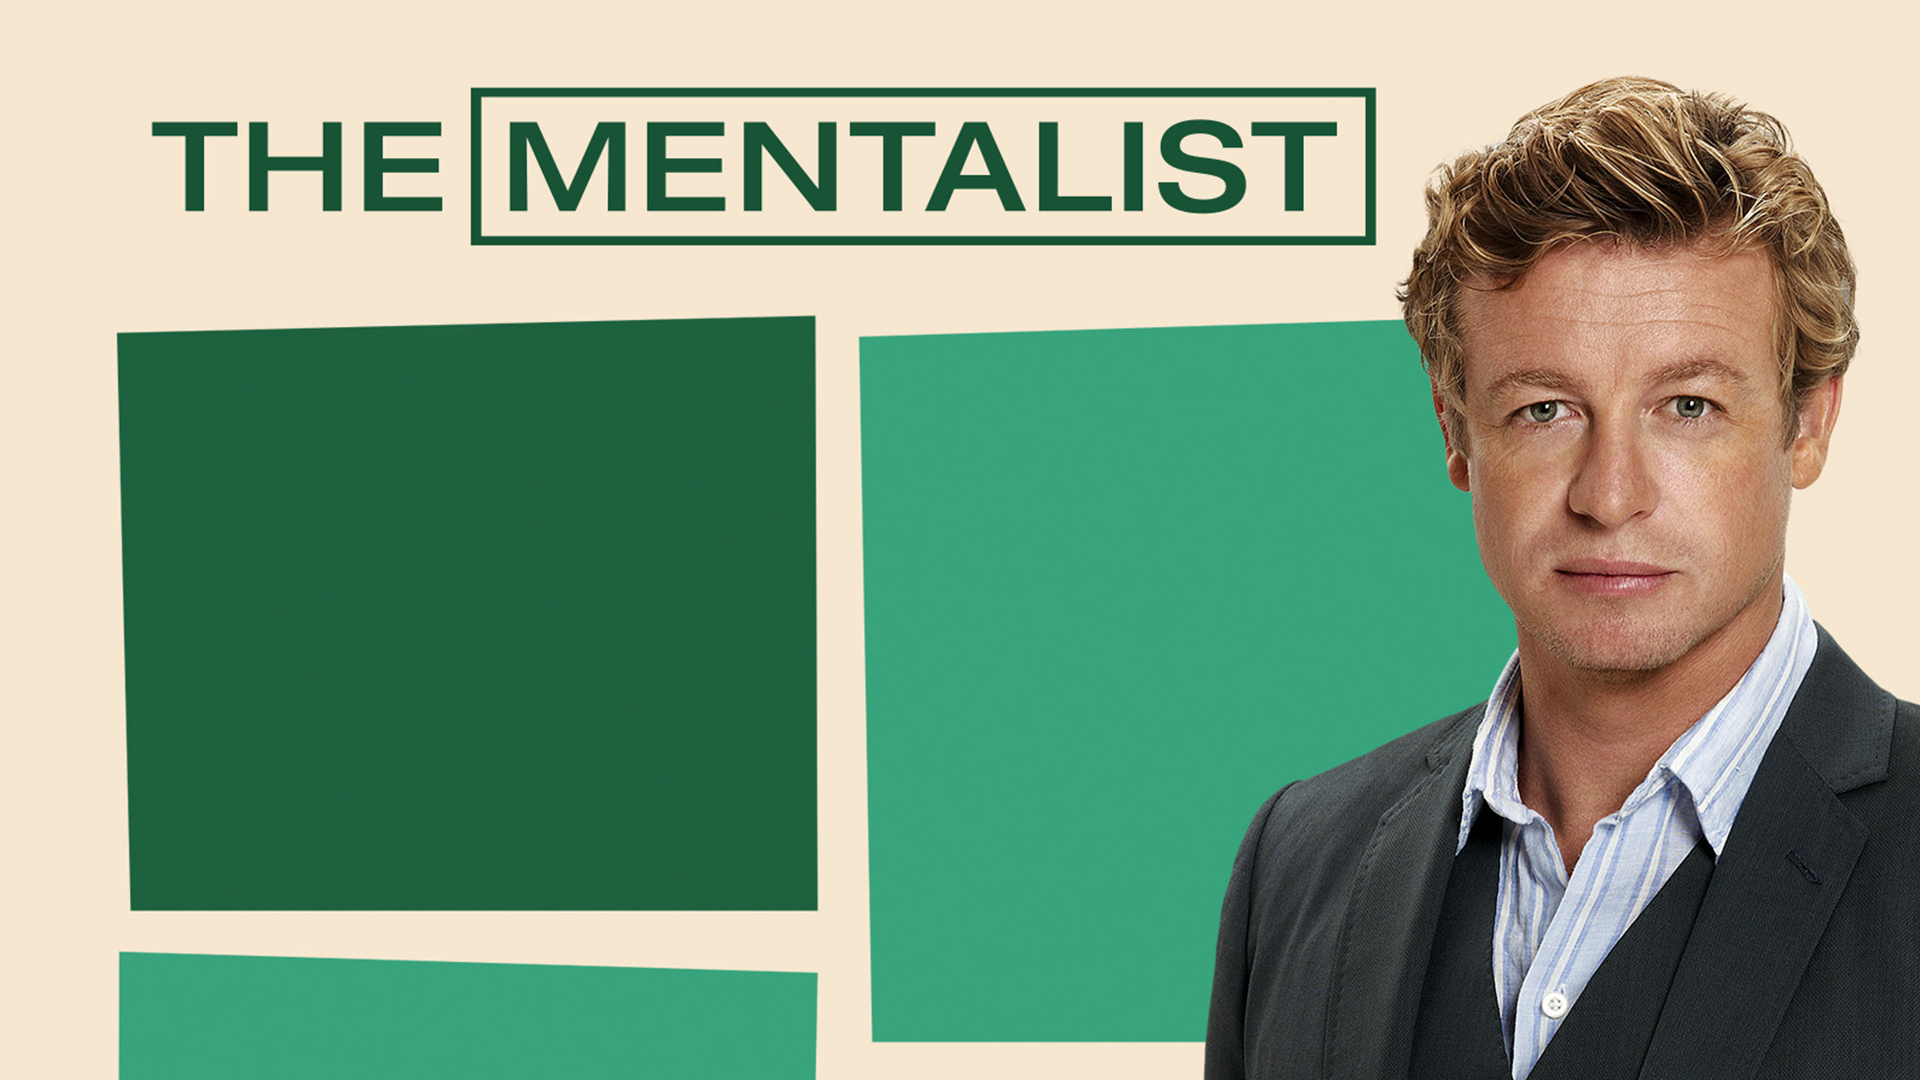 The Mentalist HD Wallpaper - Download Now!